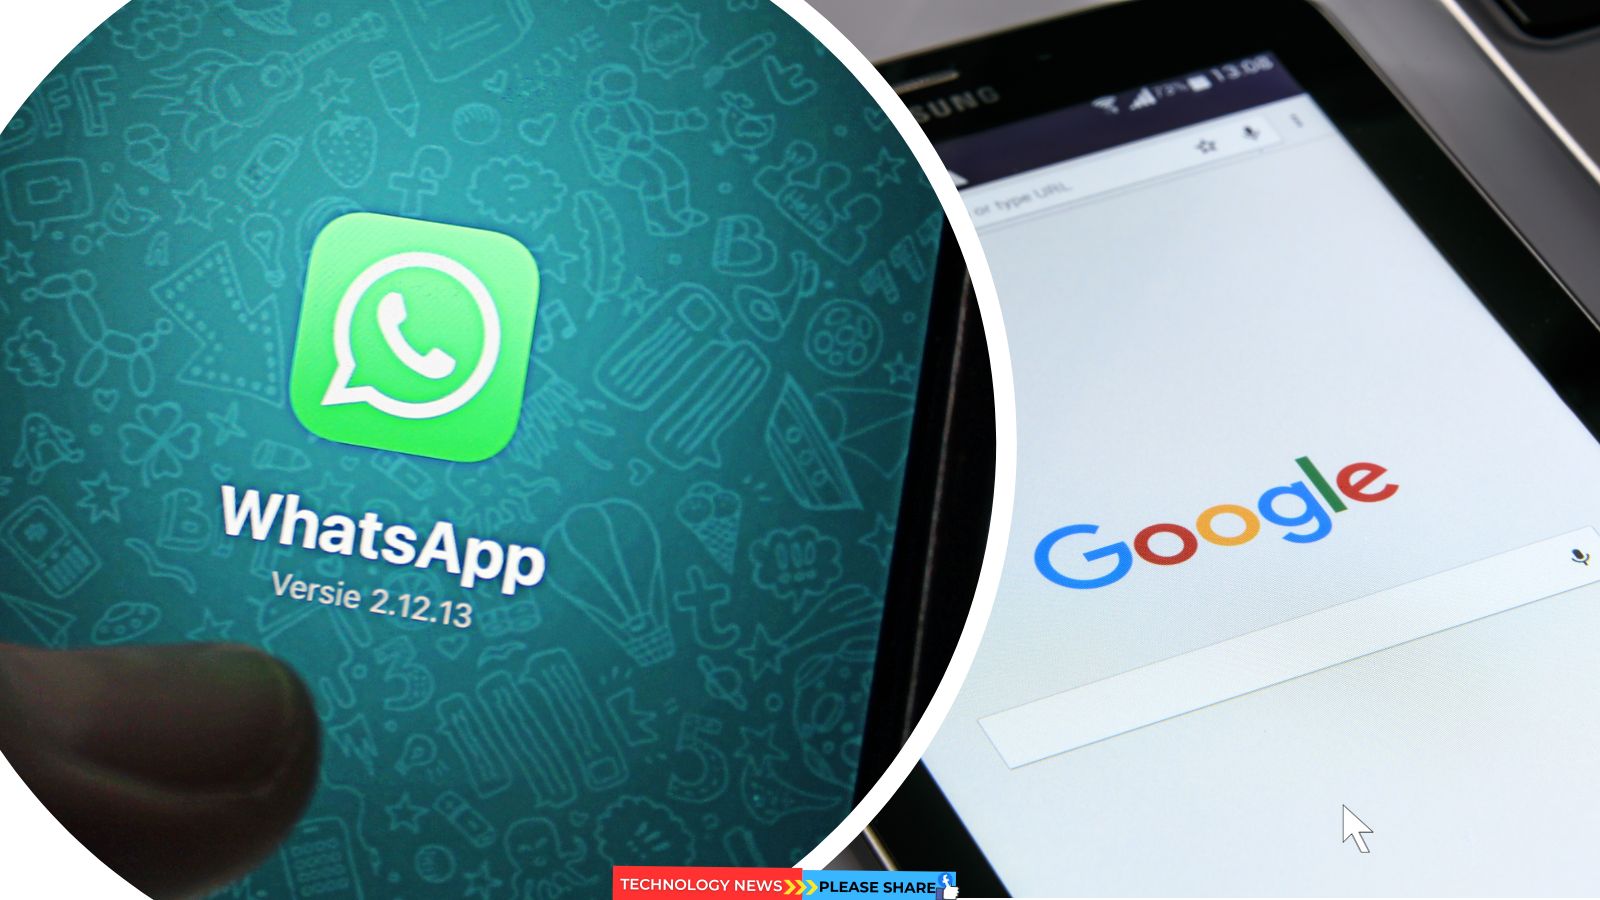 WhatsApp Backups on Android to Soon Count Towards Google Drive Storage